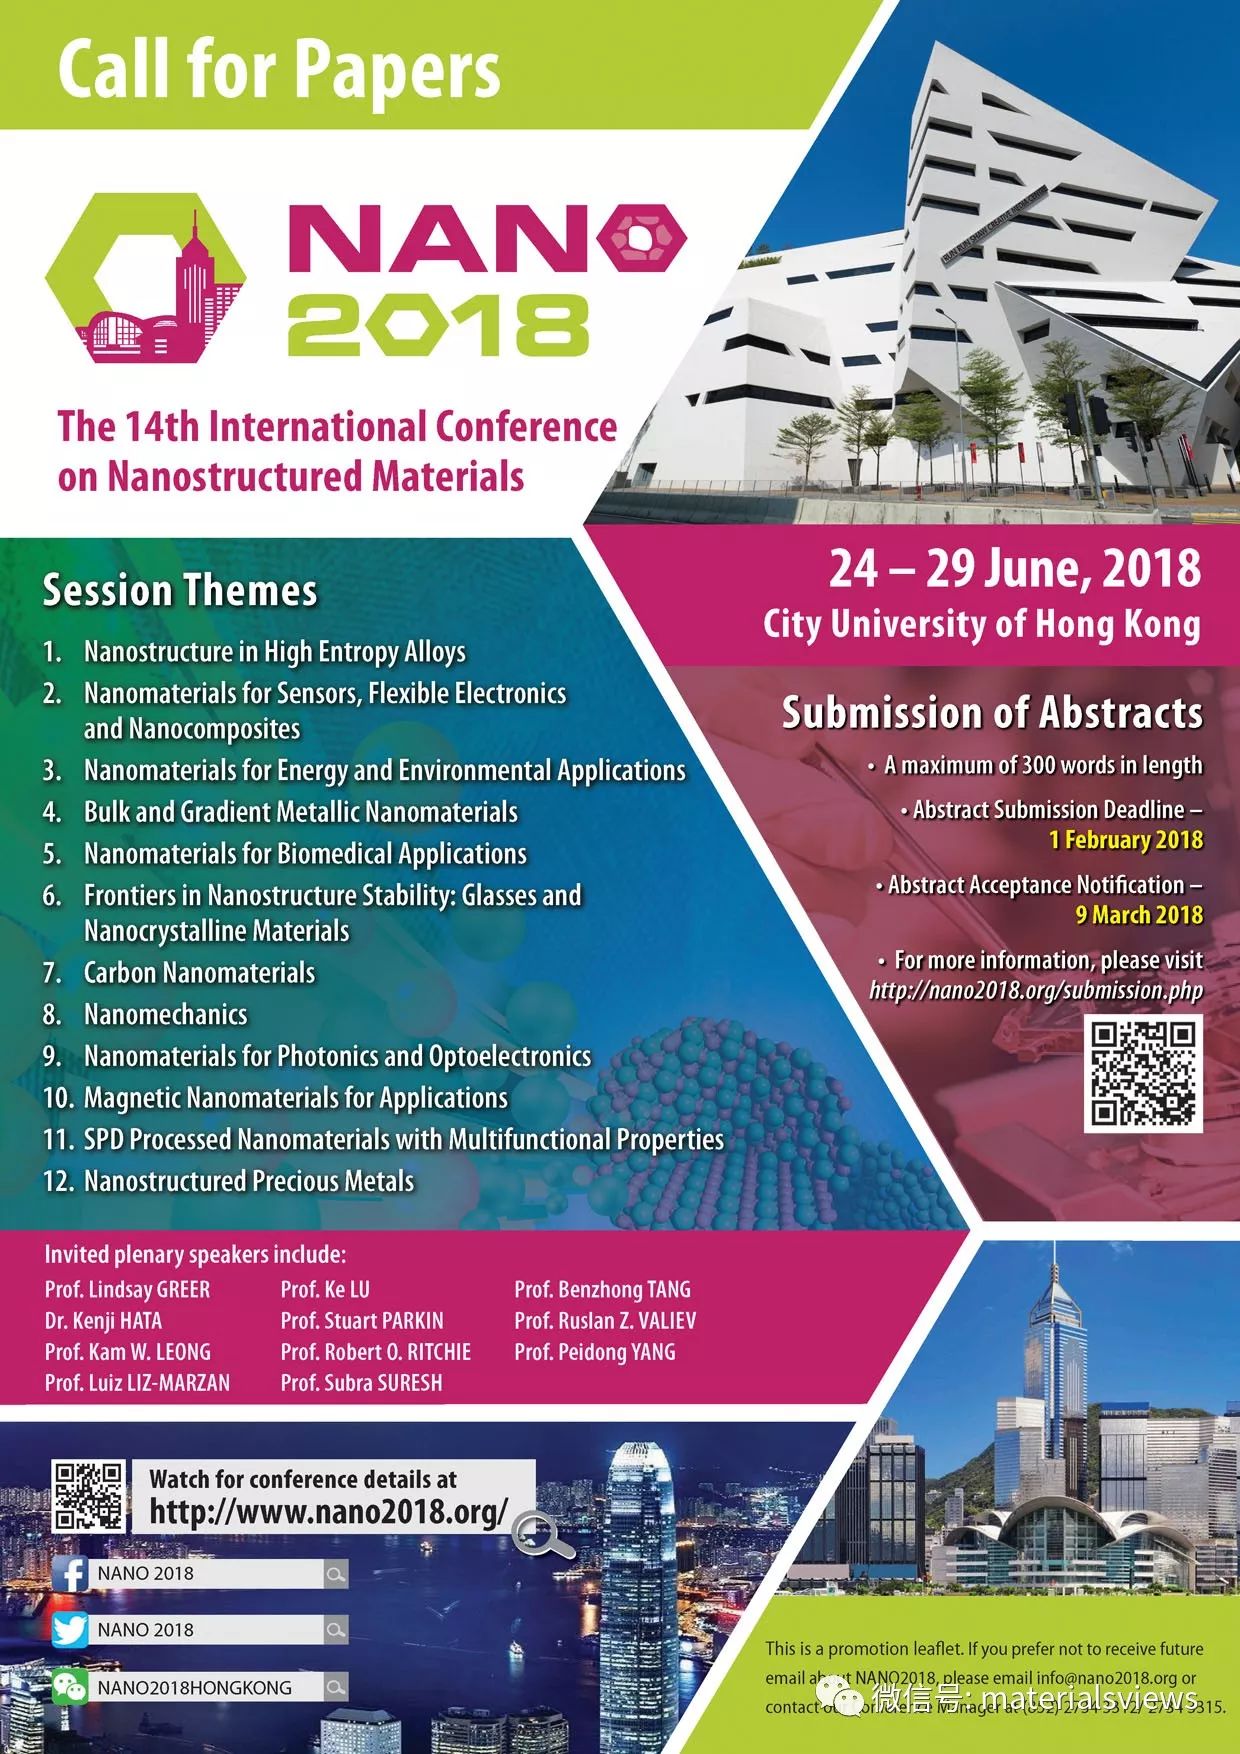 Join us in celebrating 30 years of Advanced Materials @NANO2018